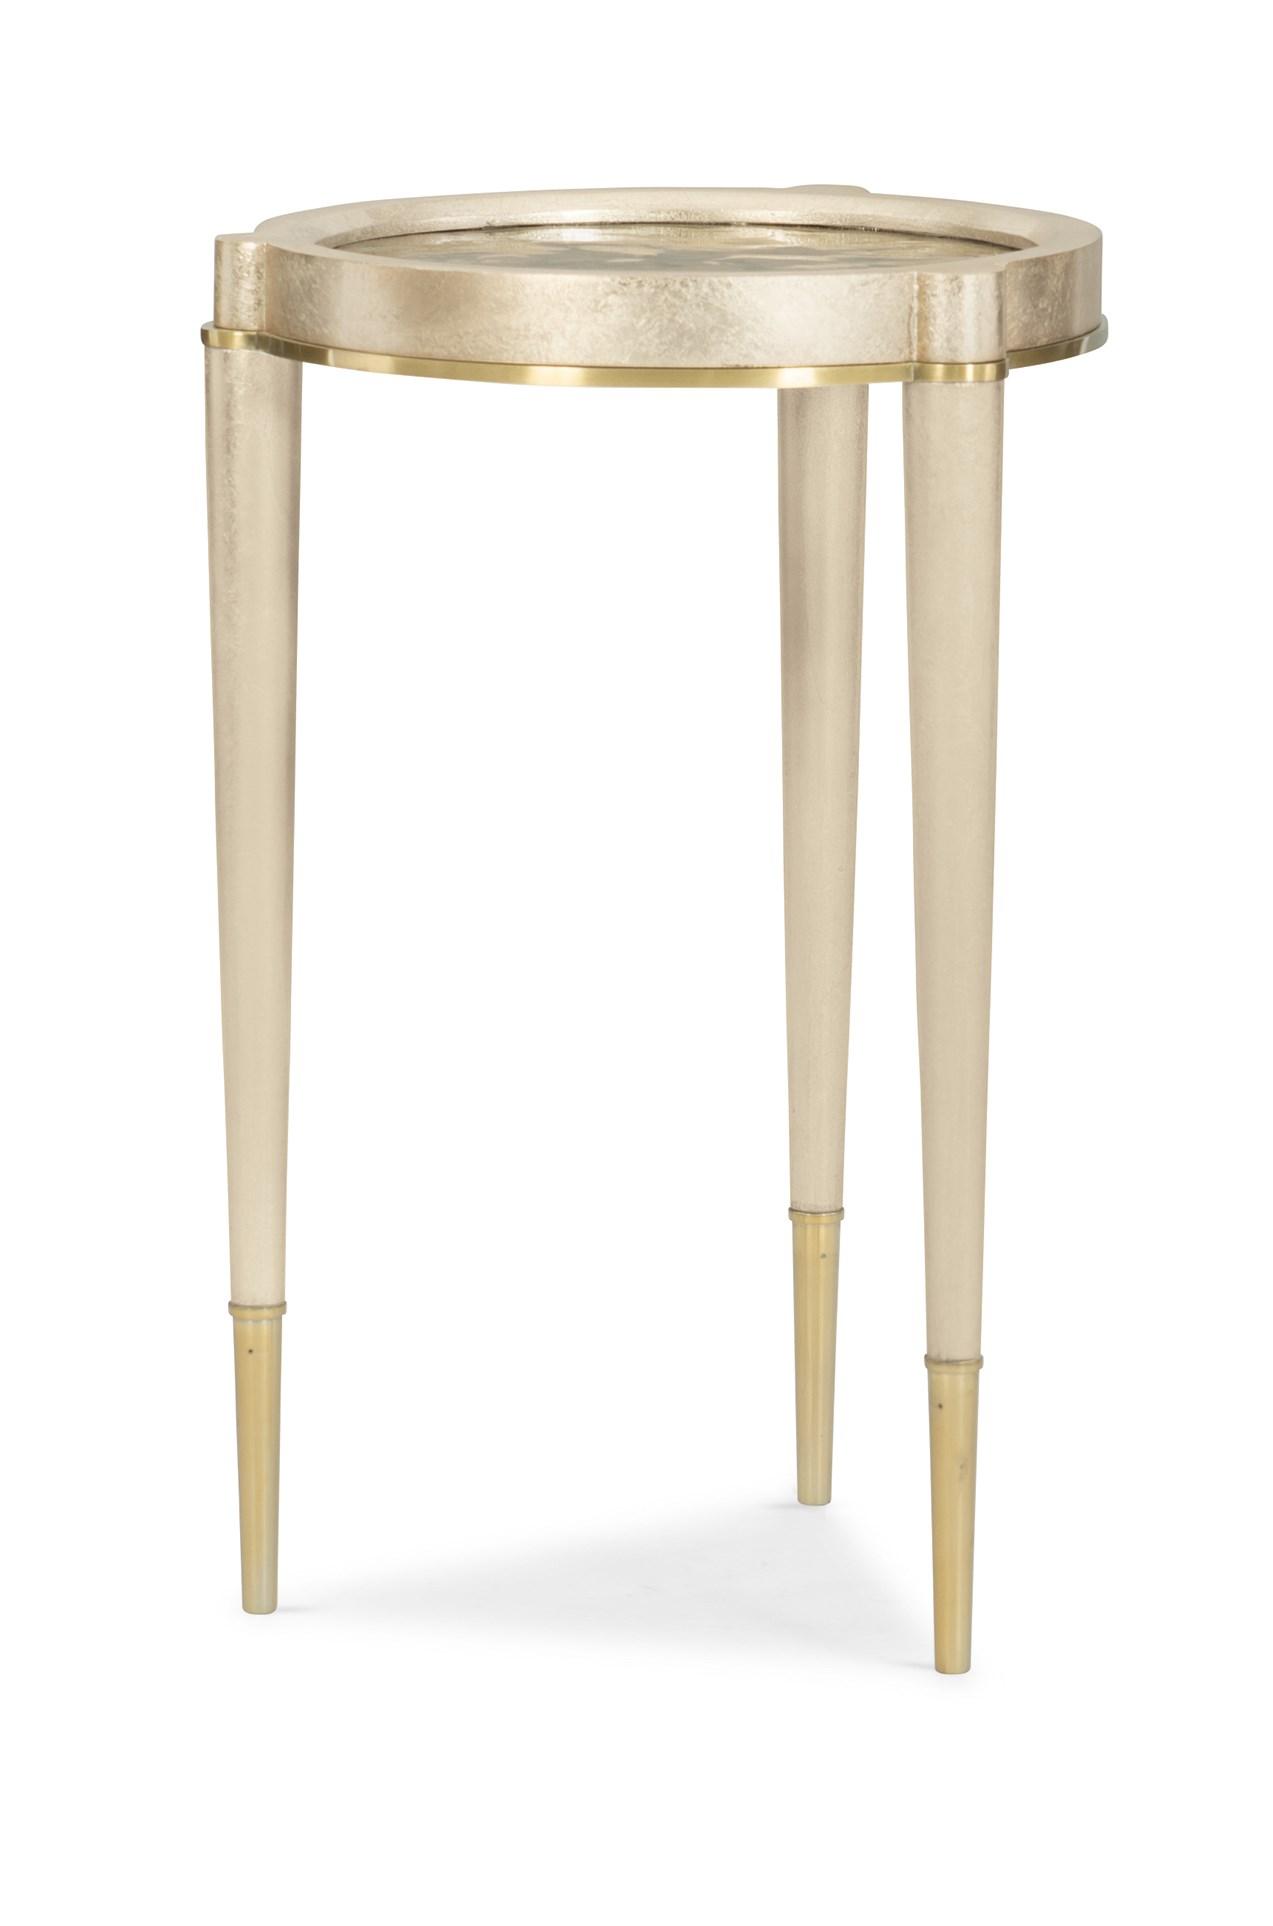 Contemporary End Table SKINNY DIP CLA-018-422 in Metallic, Gold 